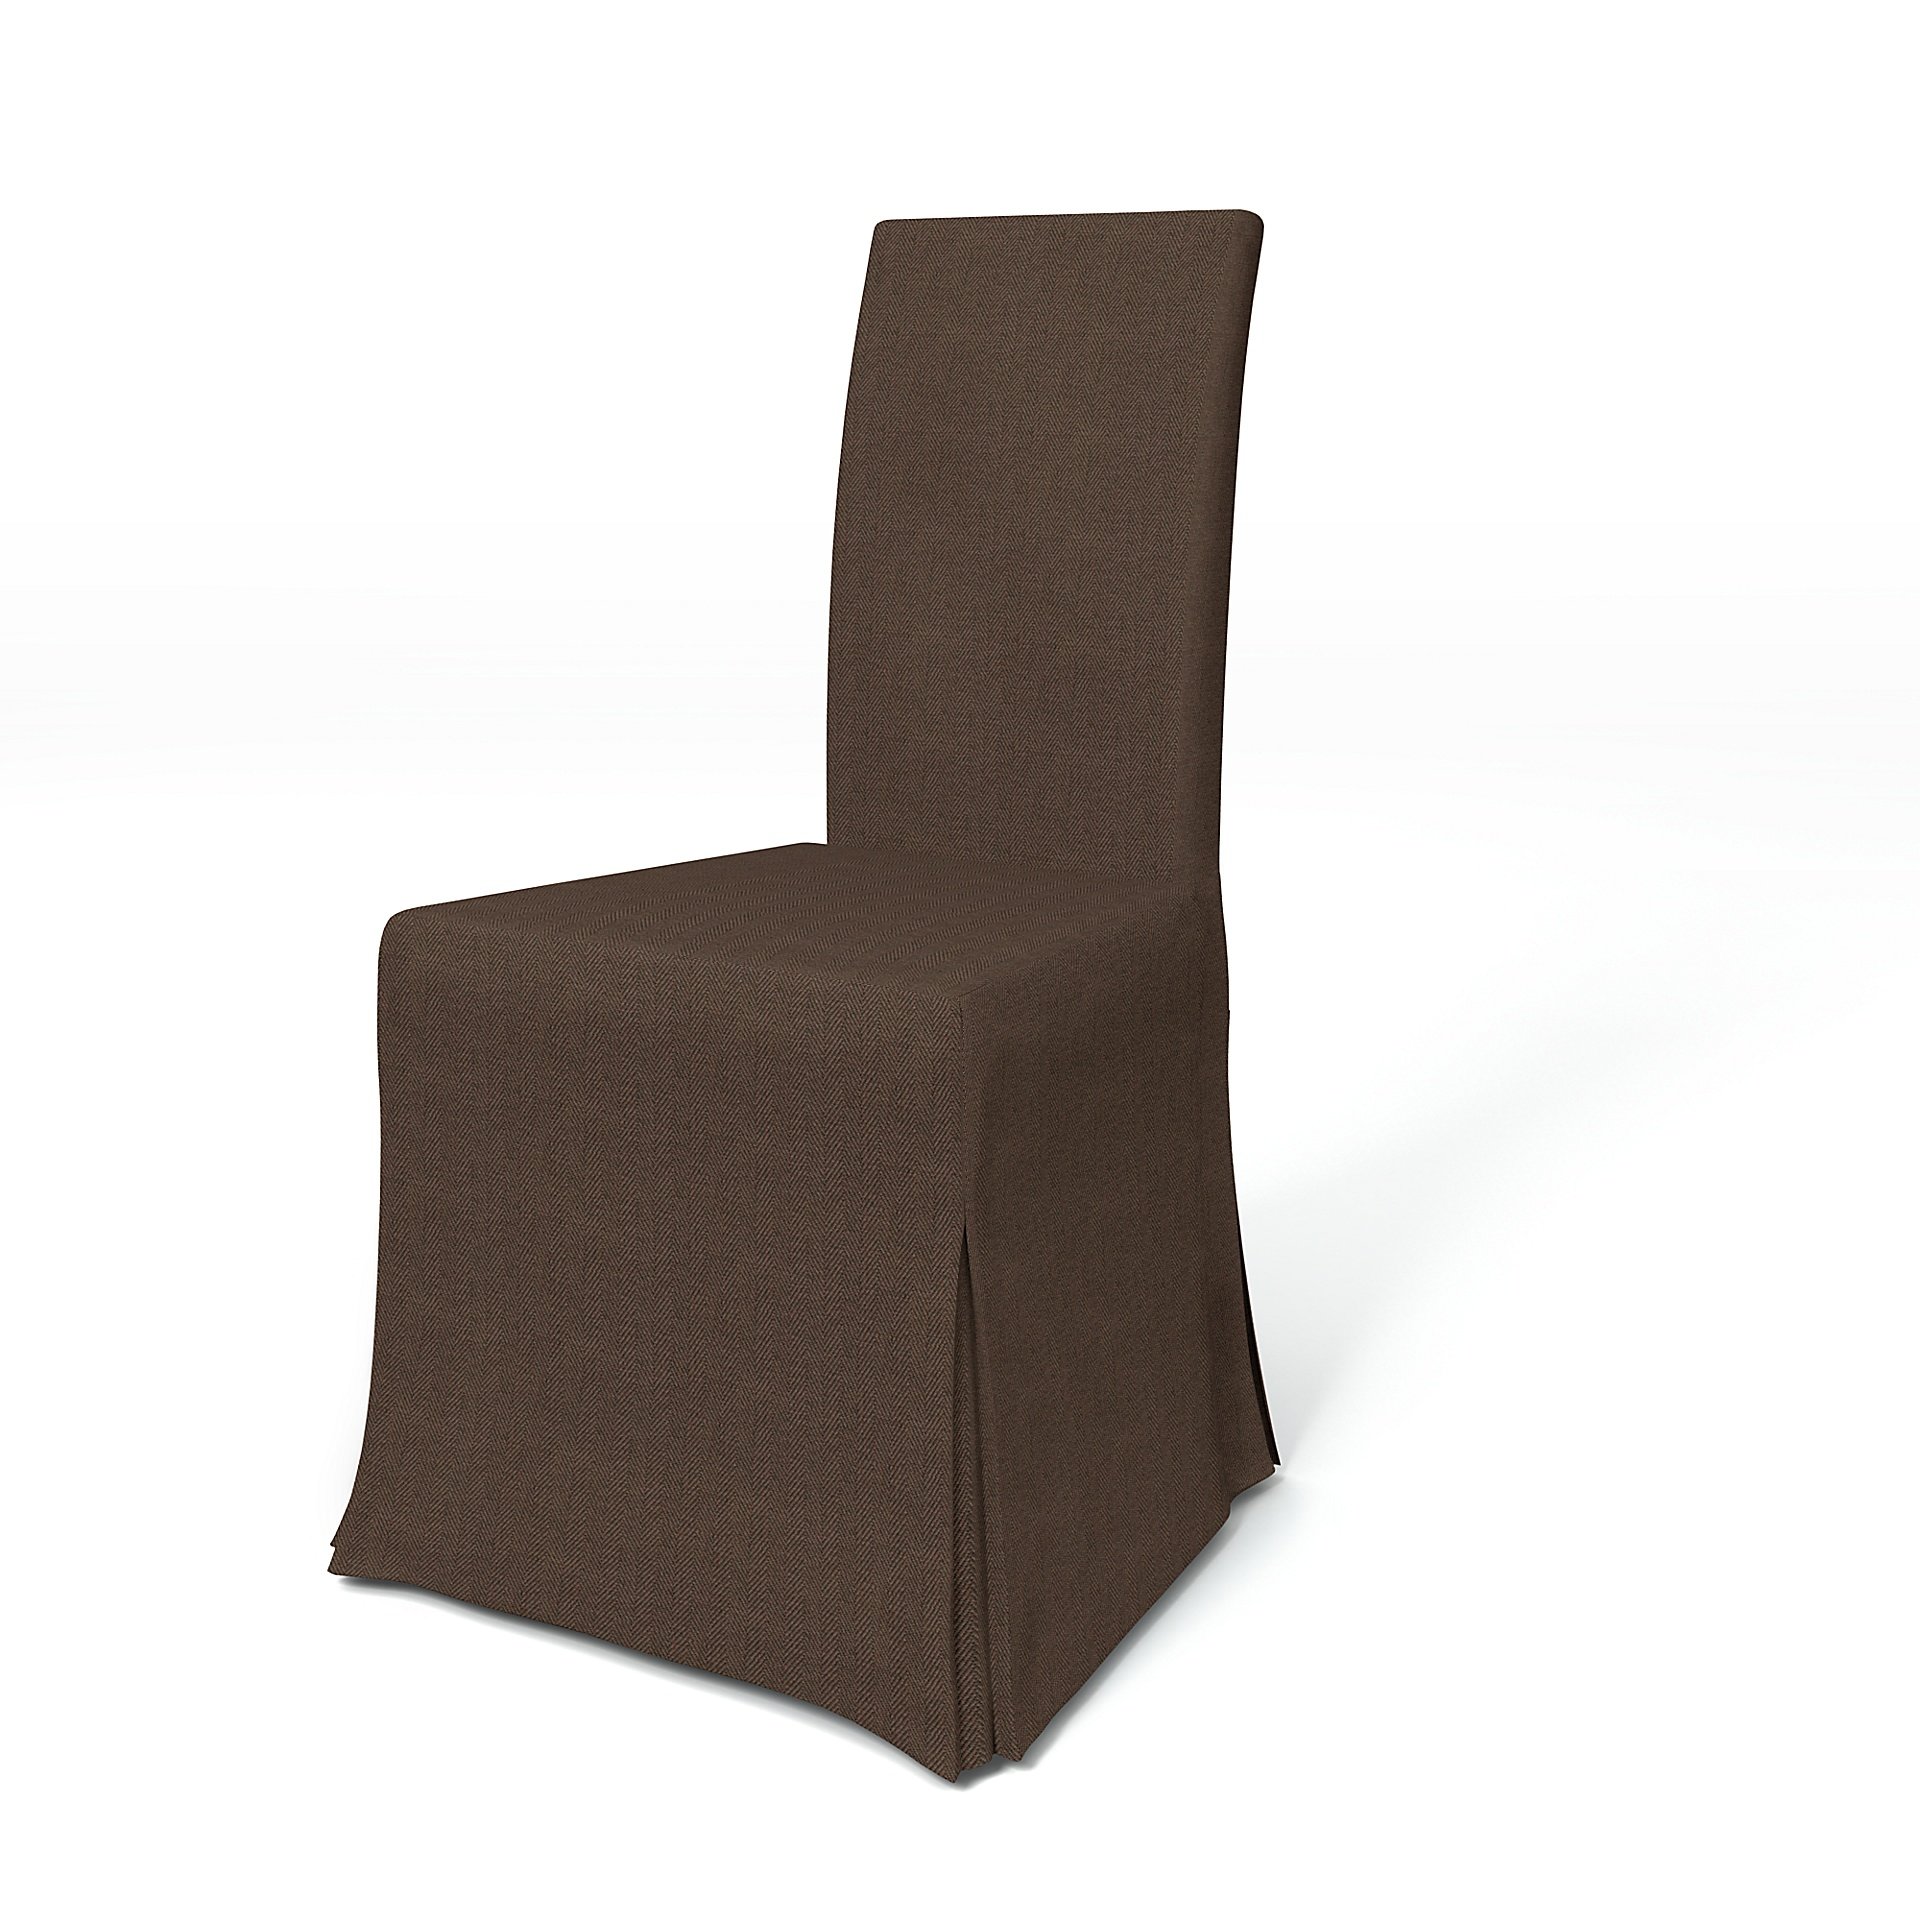 IKEA - Harry Dining Chair Cover, Chocolate, Boucle & Texture - Bemz